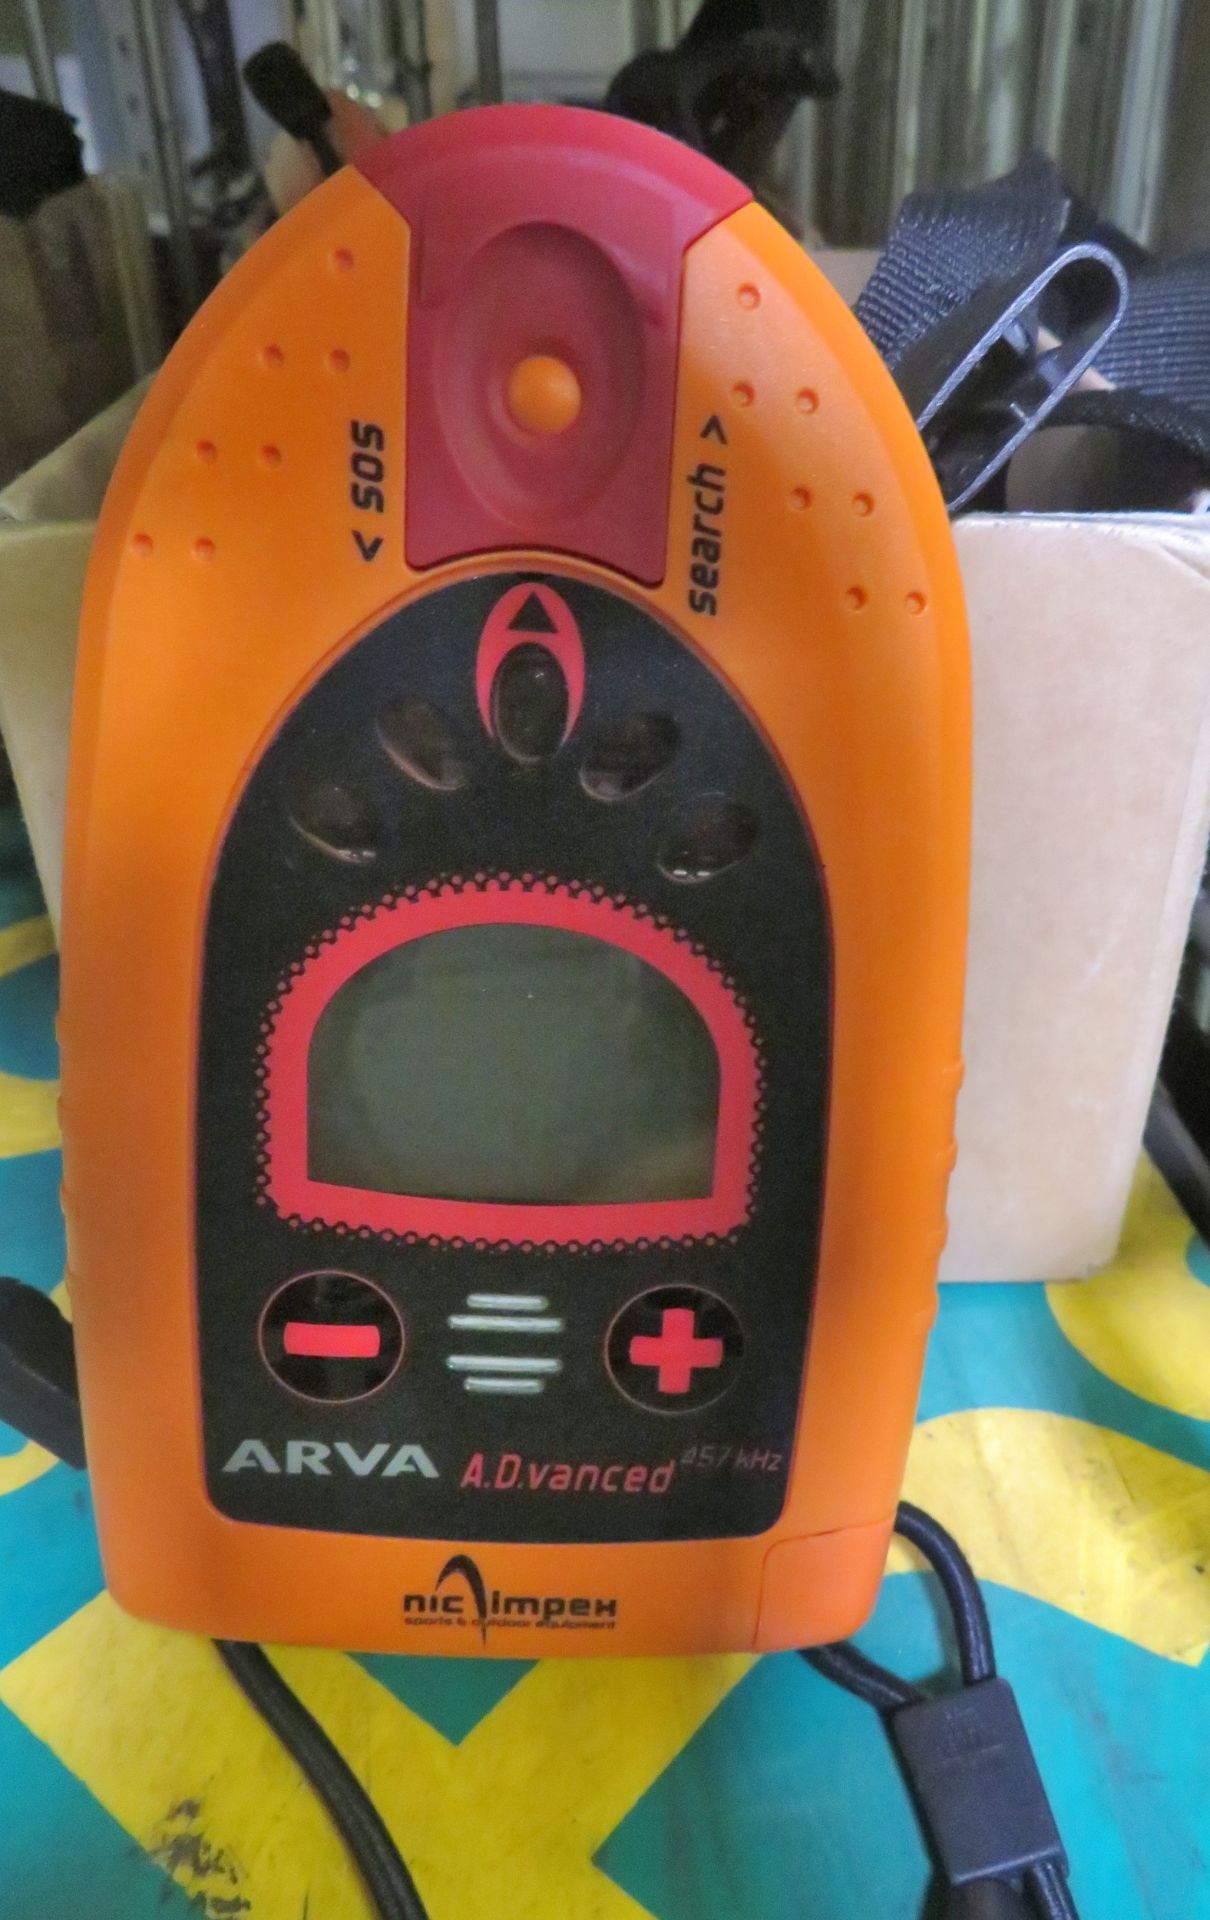 2x Arva Advanced Avalanche Transceivers - Image 2 of 2